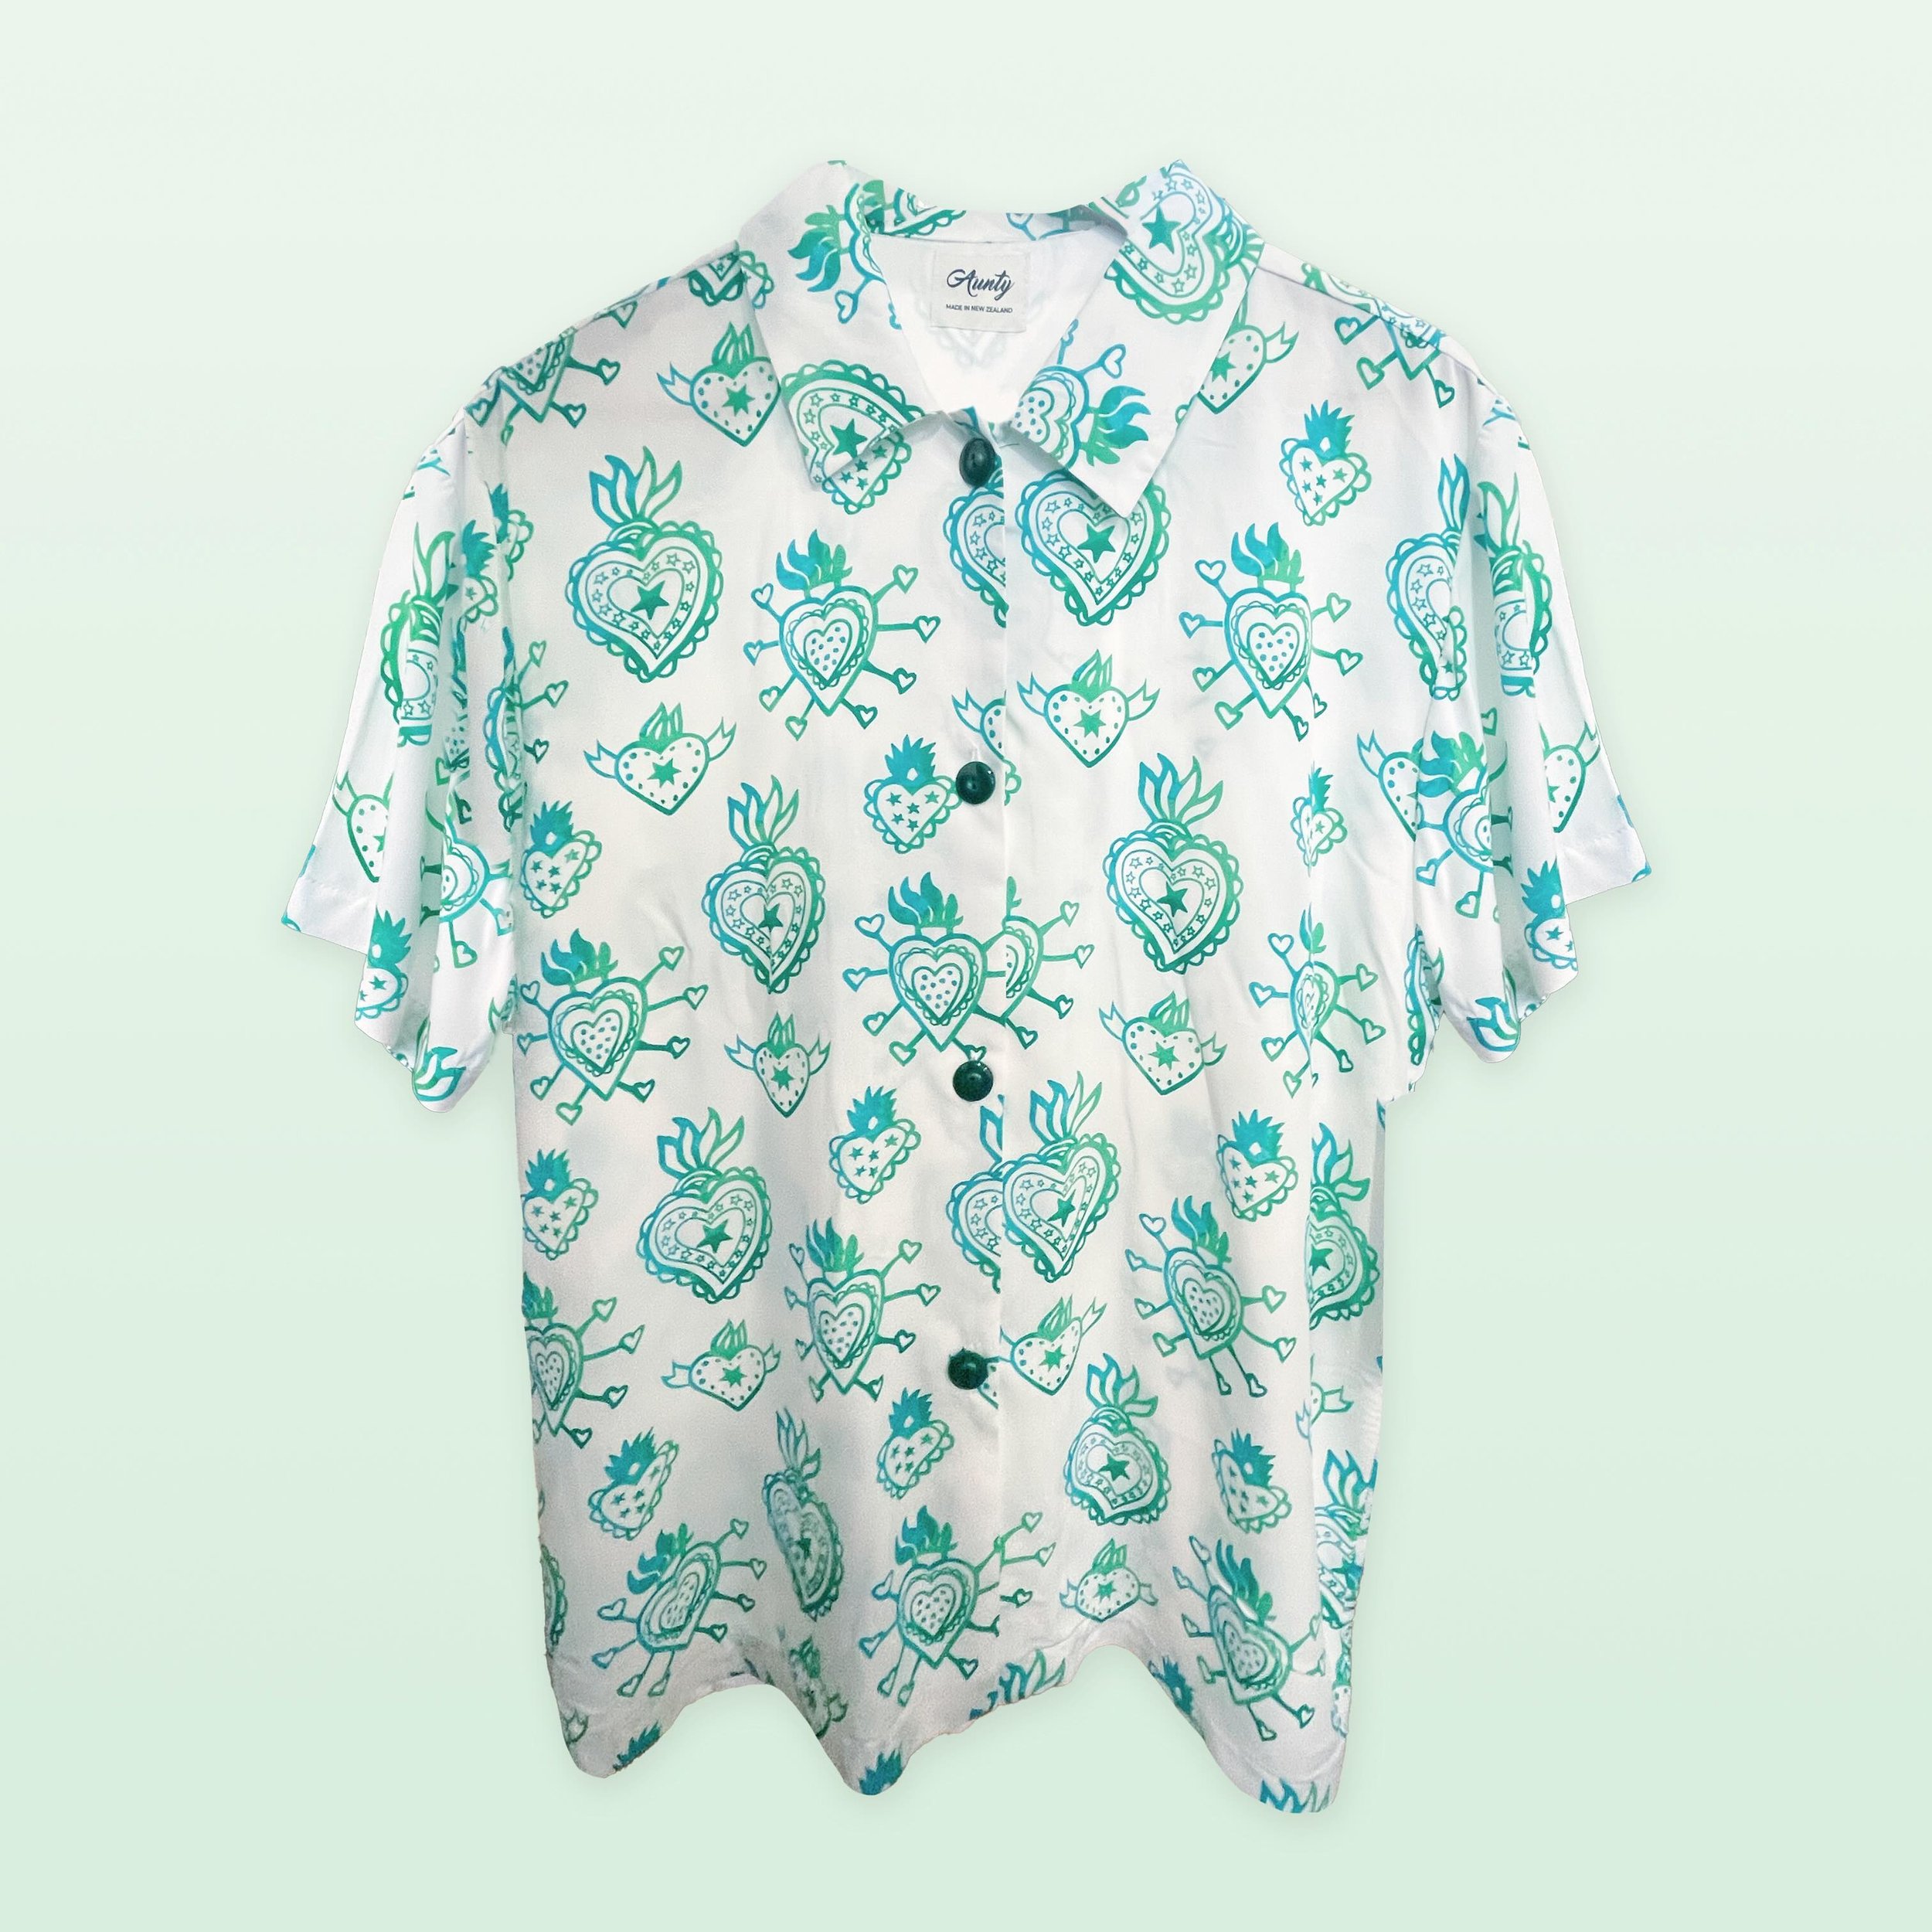 Always a fab textile print in @auntyclothing garments, like this shirt. Come in and check out all the wonderful garments currently in store!
.
.
.
#fashion #design #print #textile #pattern #nzfashion #shirt #blouse #garment #fashiondesigner #nzmade #